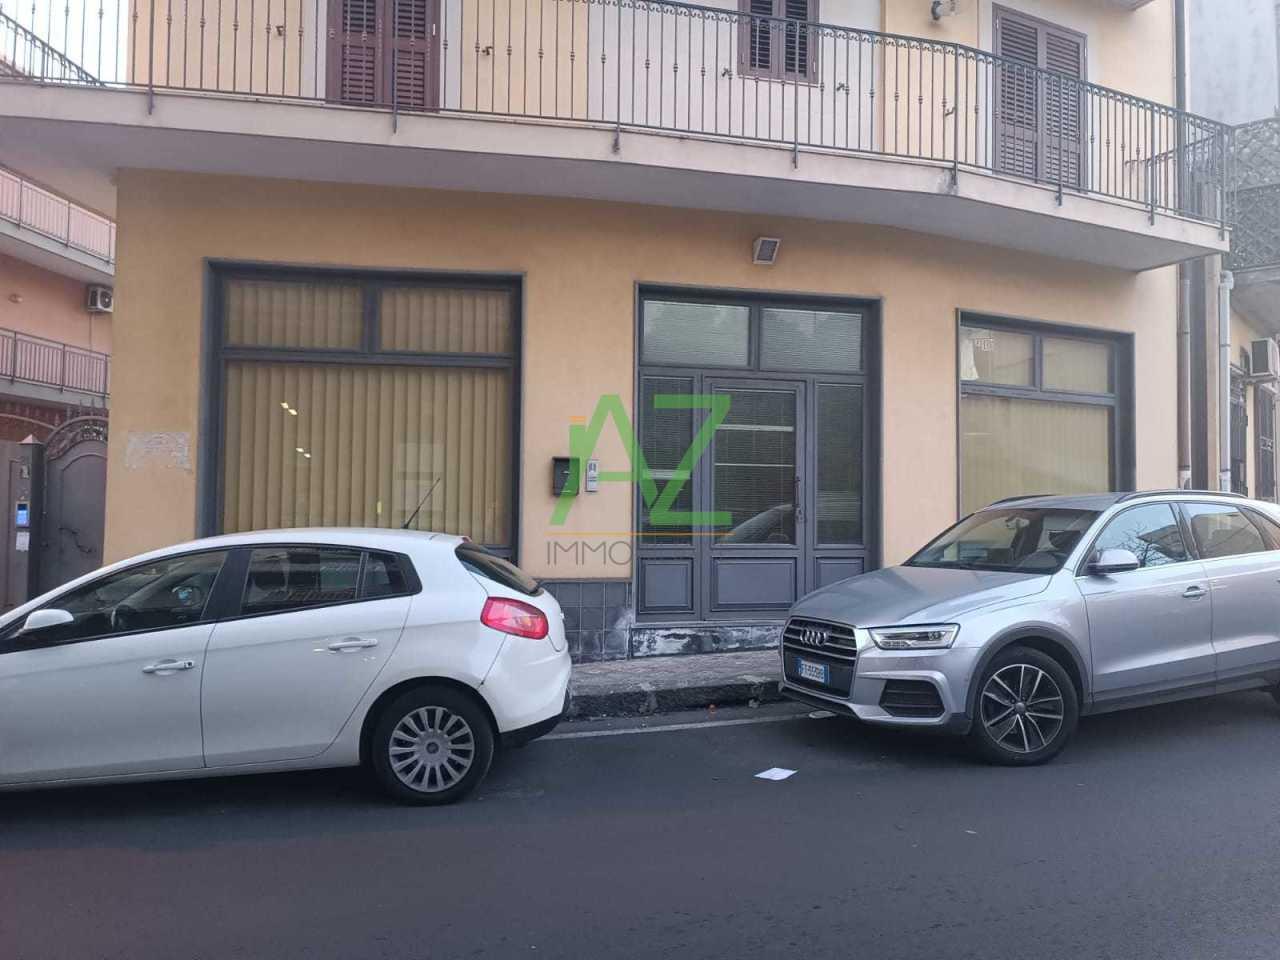 Palazzina commerciale in affitto a Misterbianco